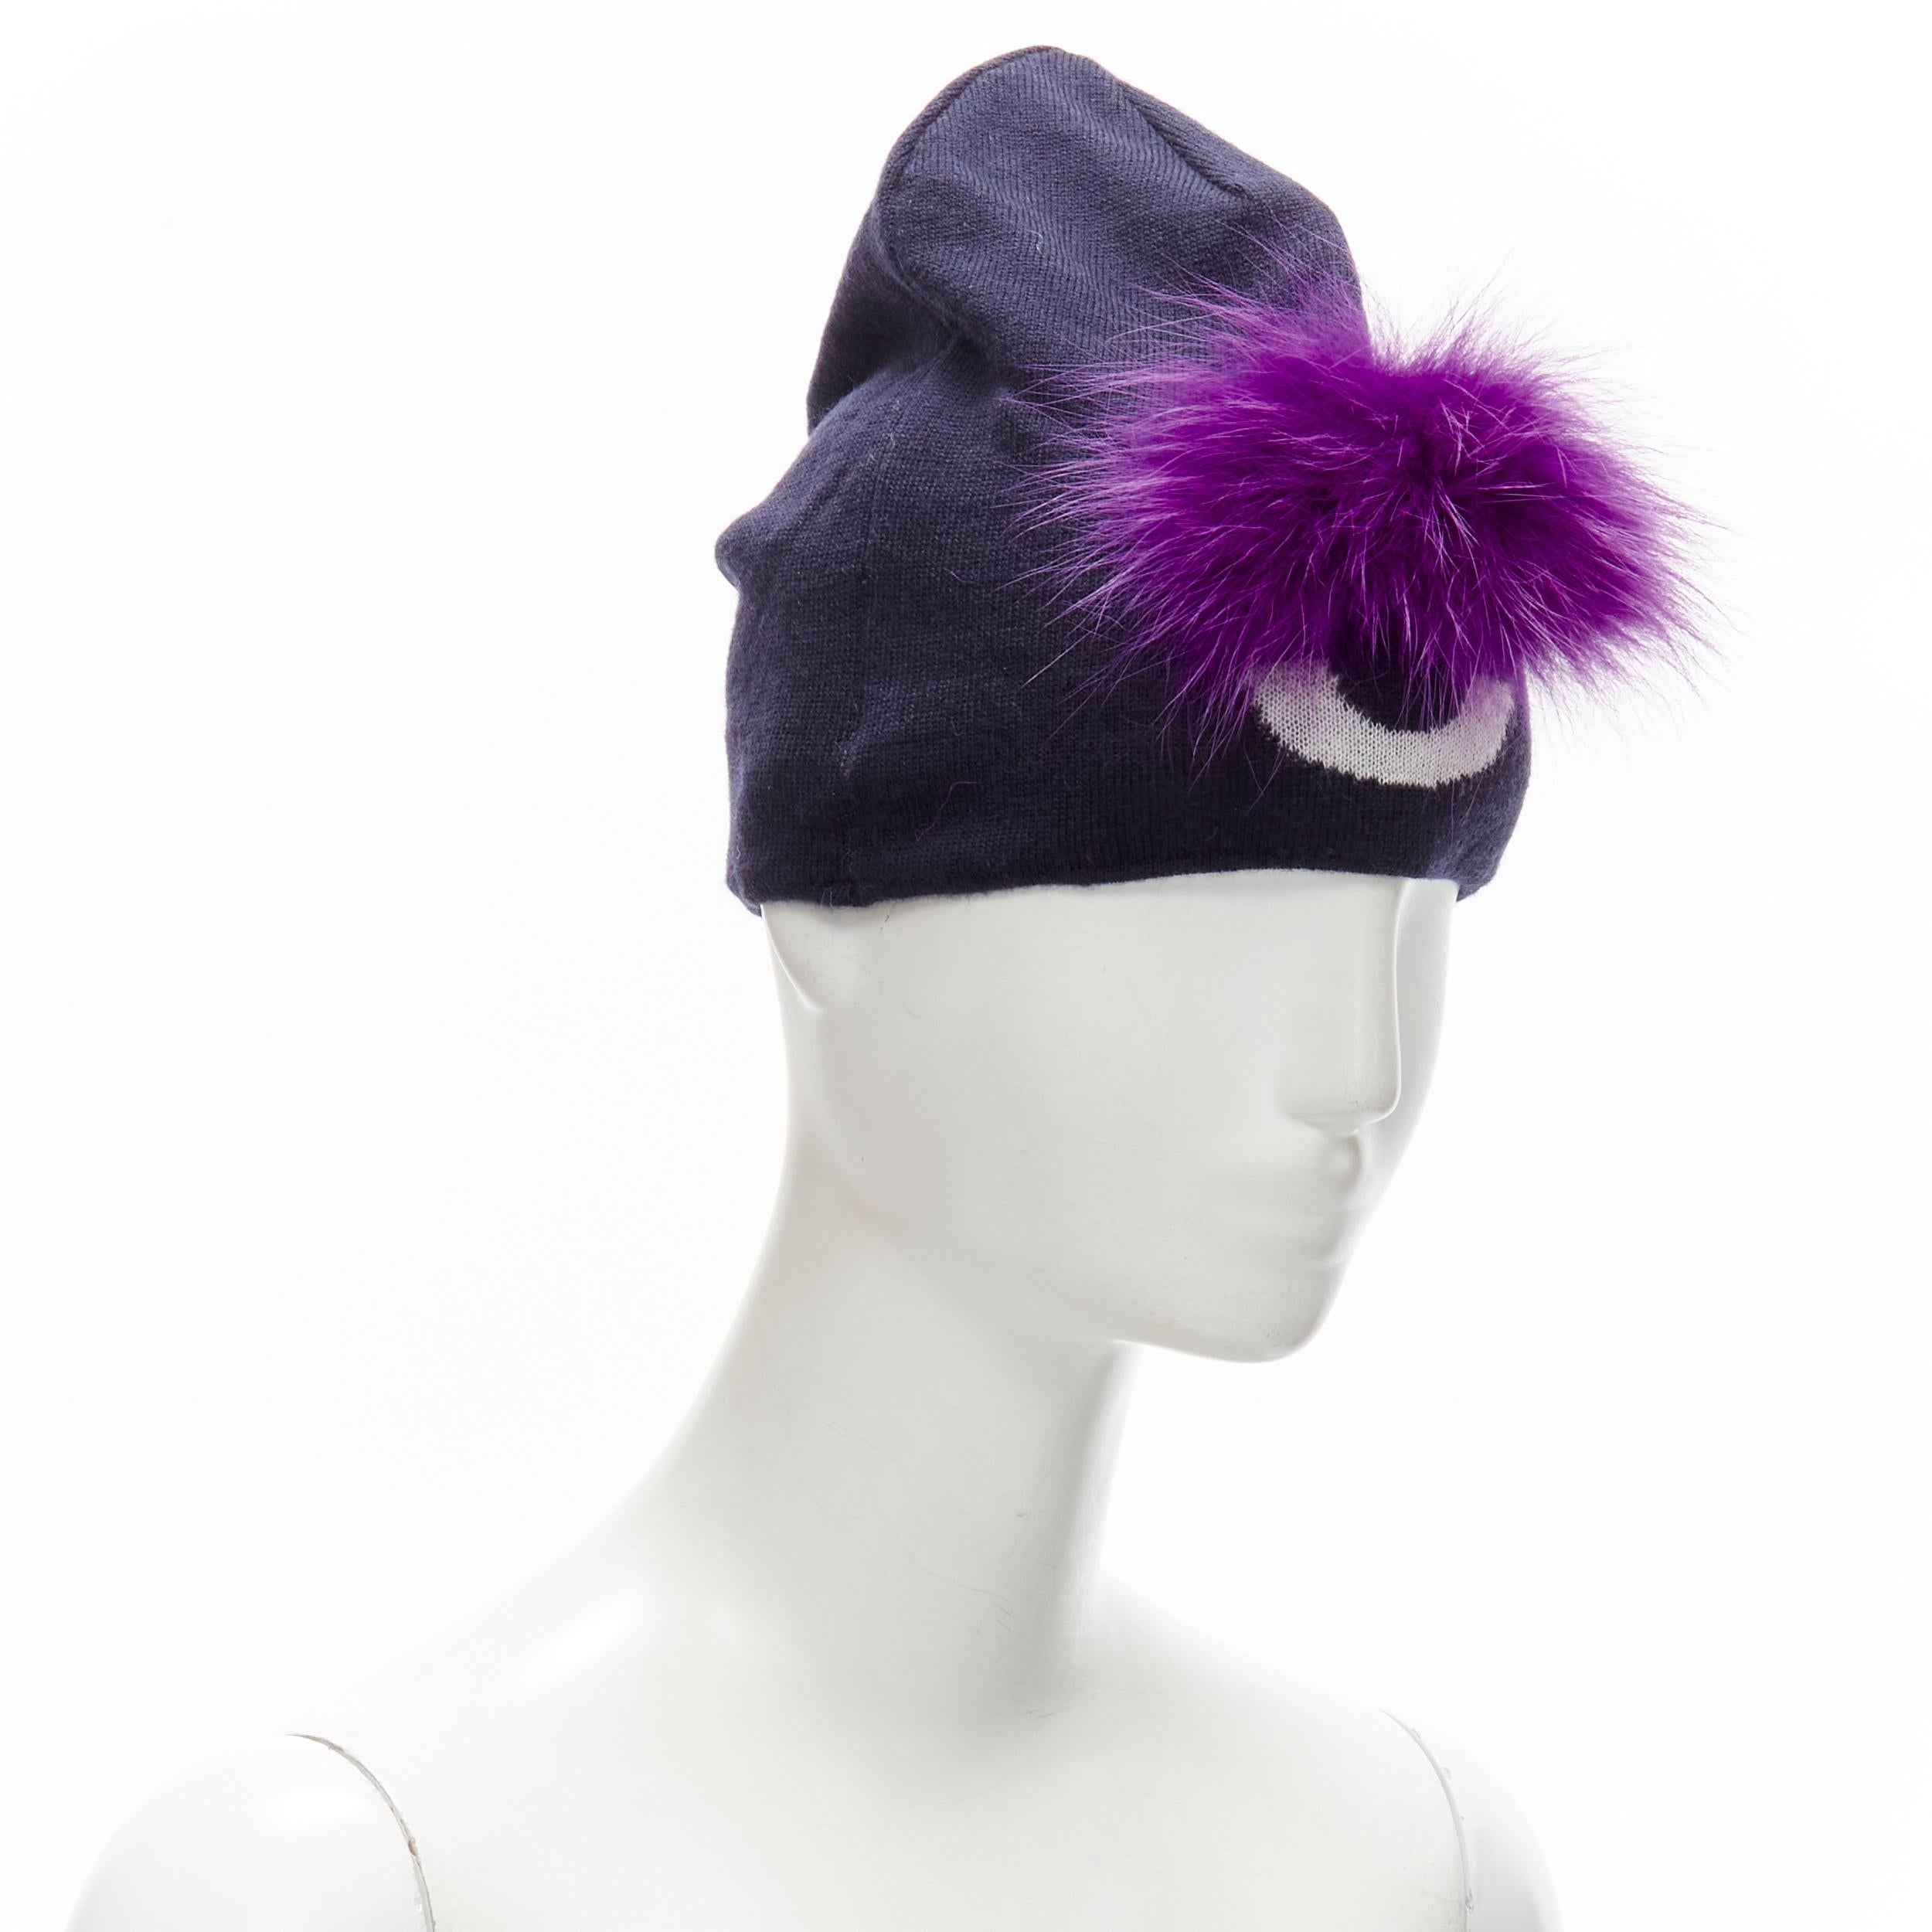 FENDI Monster Bug Eye  100% wool arctic fox fur trim navy purple beanie hat
Brand: Fendi
Collection: Monster Bug 
Material: Wool
Color: Navy
Pattern: Solid
Extra Detail: Arctic for fux trim.
Made in: Italy

CONDITION:
Condition: Excellent, this item